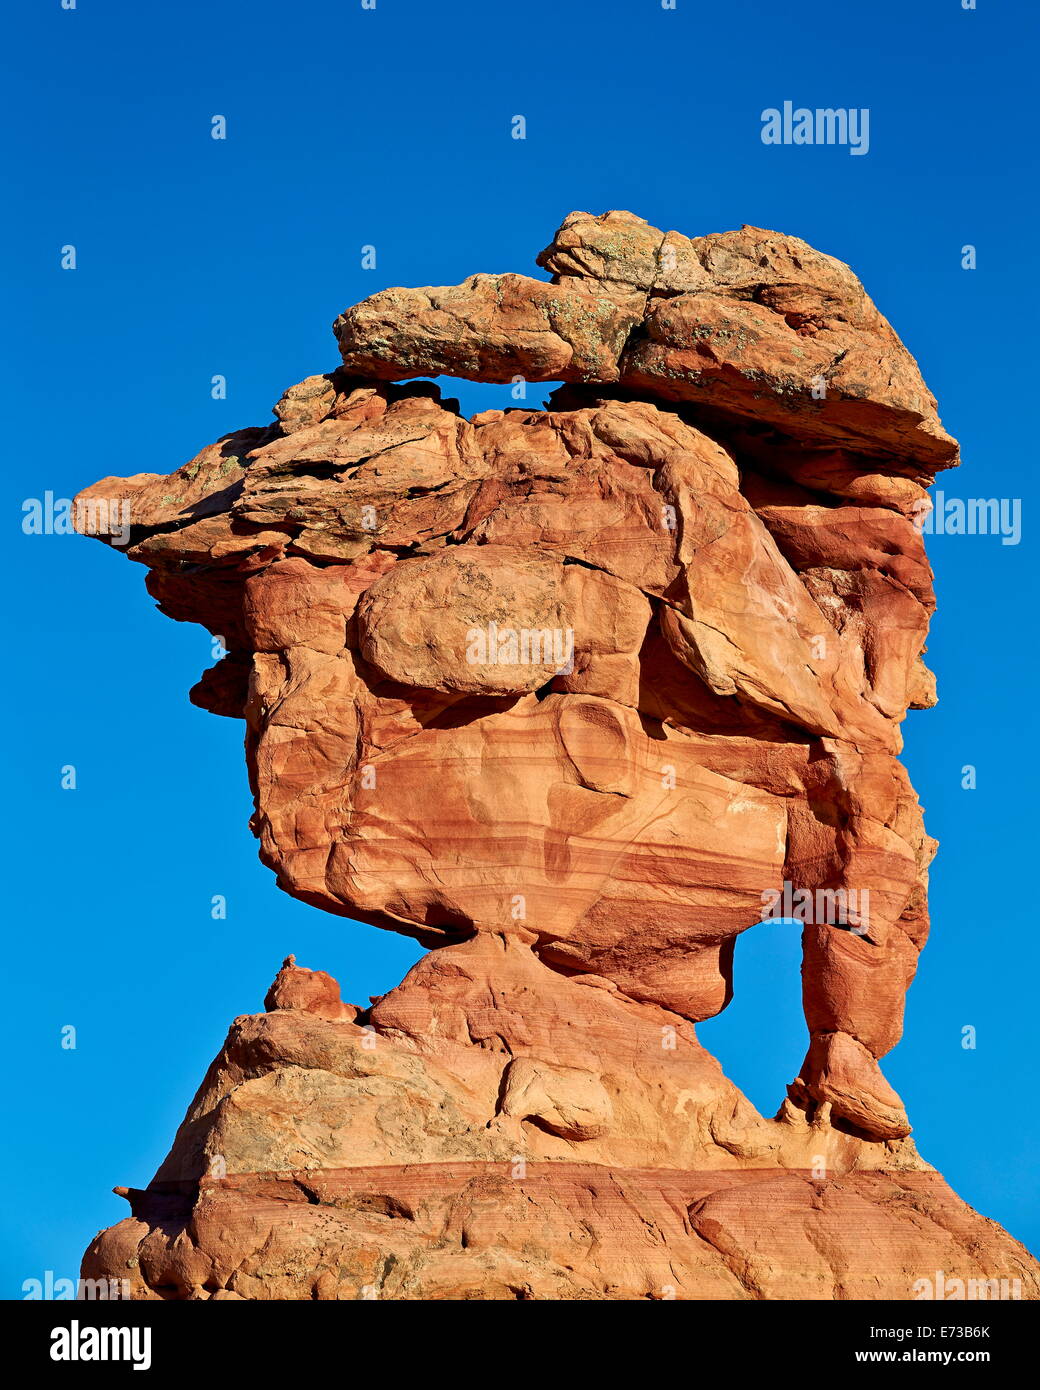 Sandstone formation, Coyote Buttes Wilderness, Vermilion Cliffs National Monument, Arizona, United States of America Stock Photo